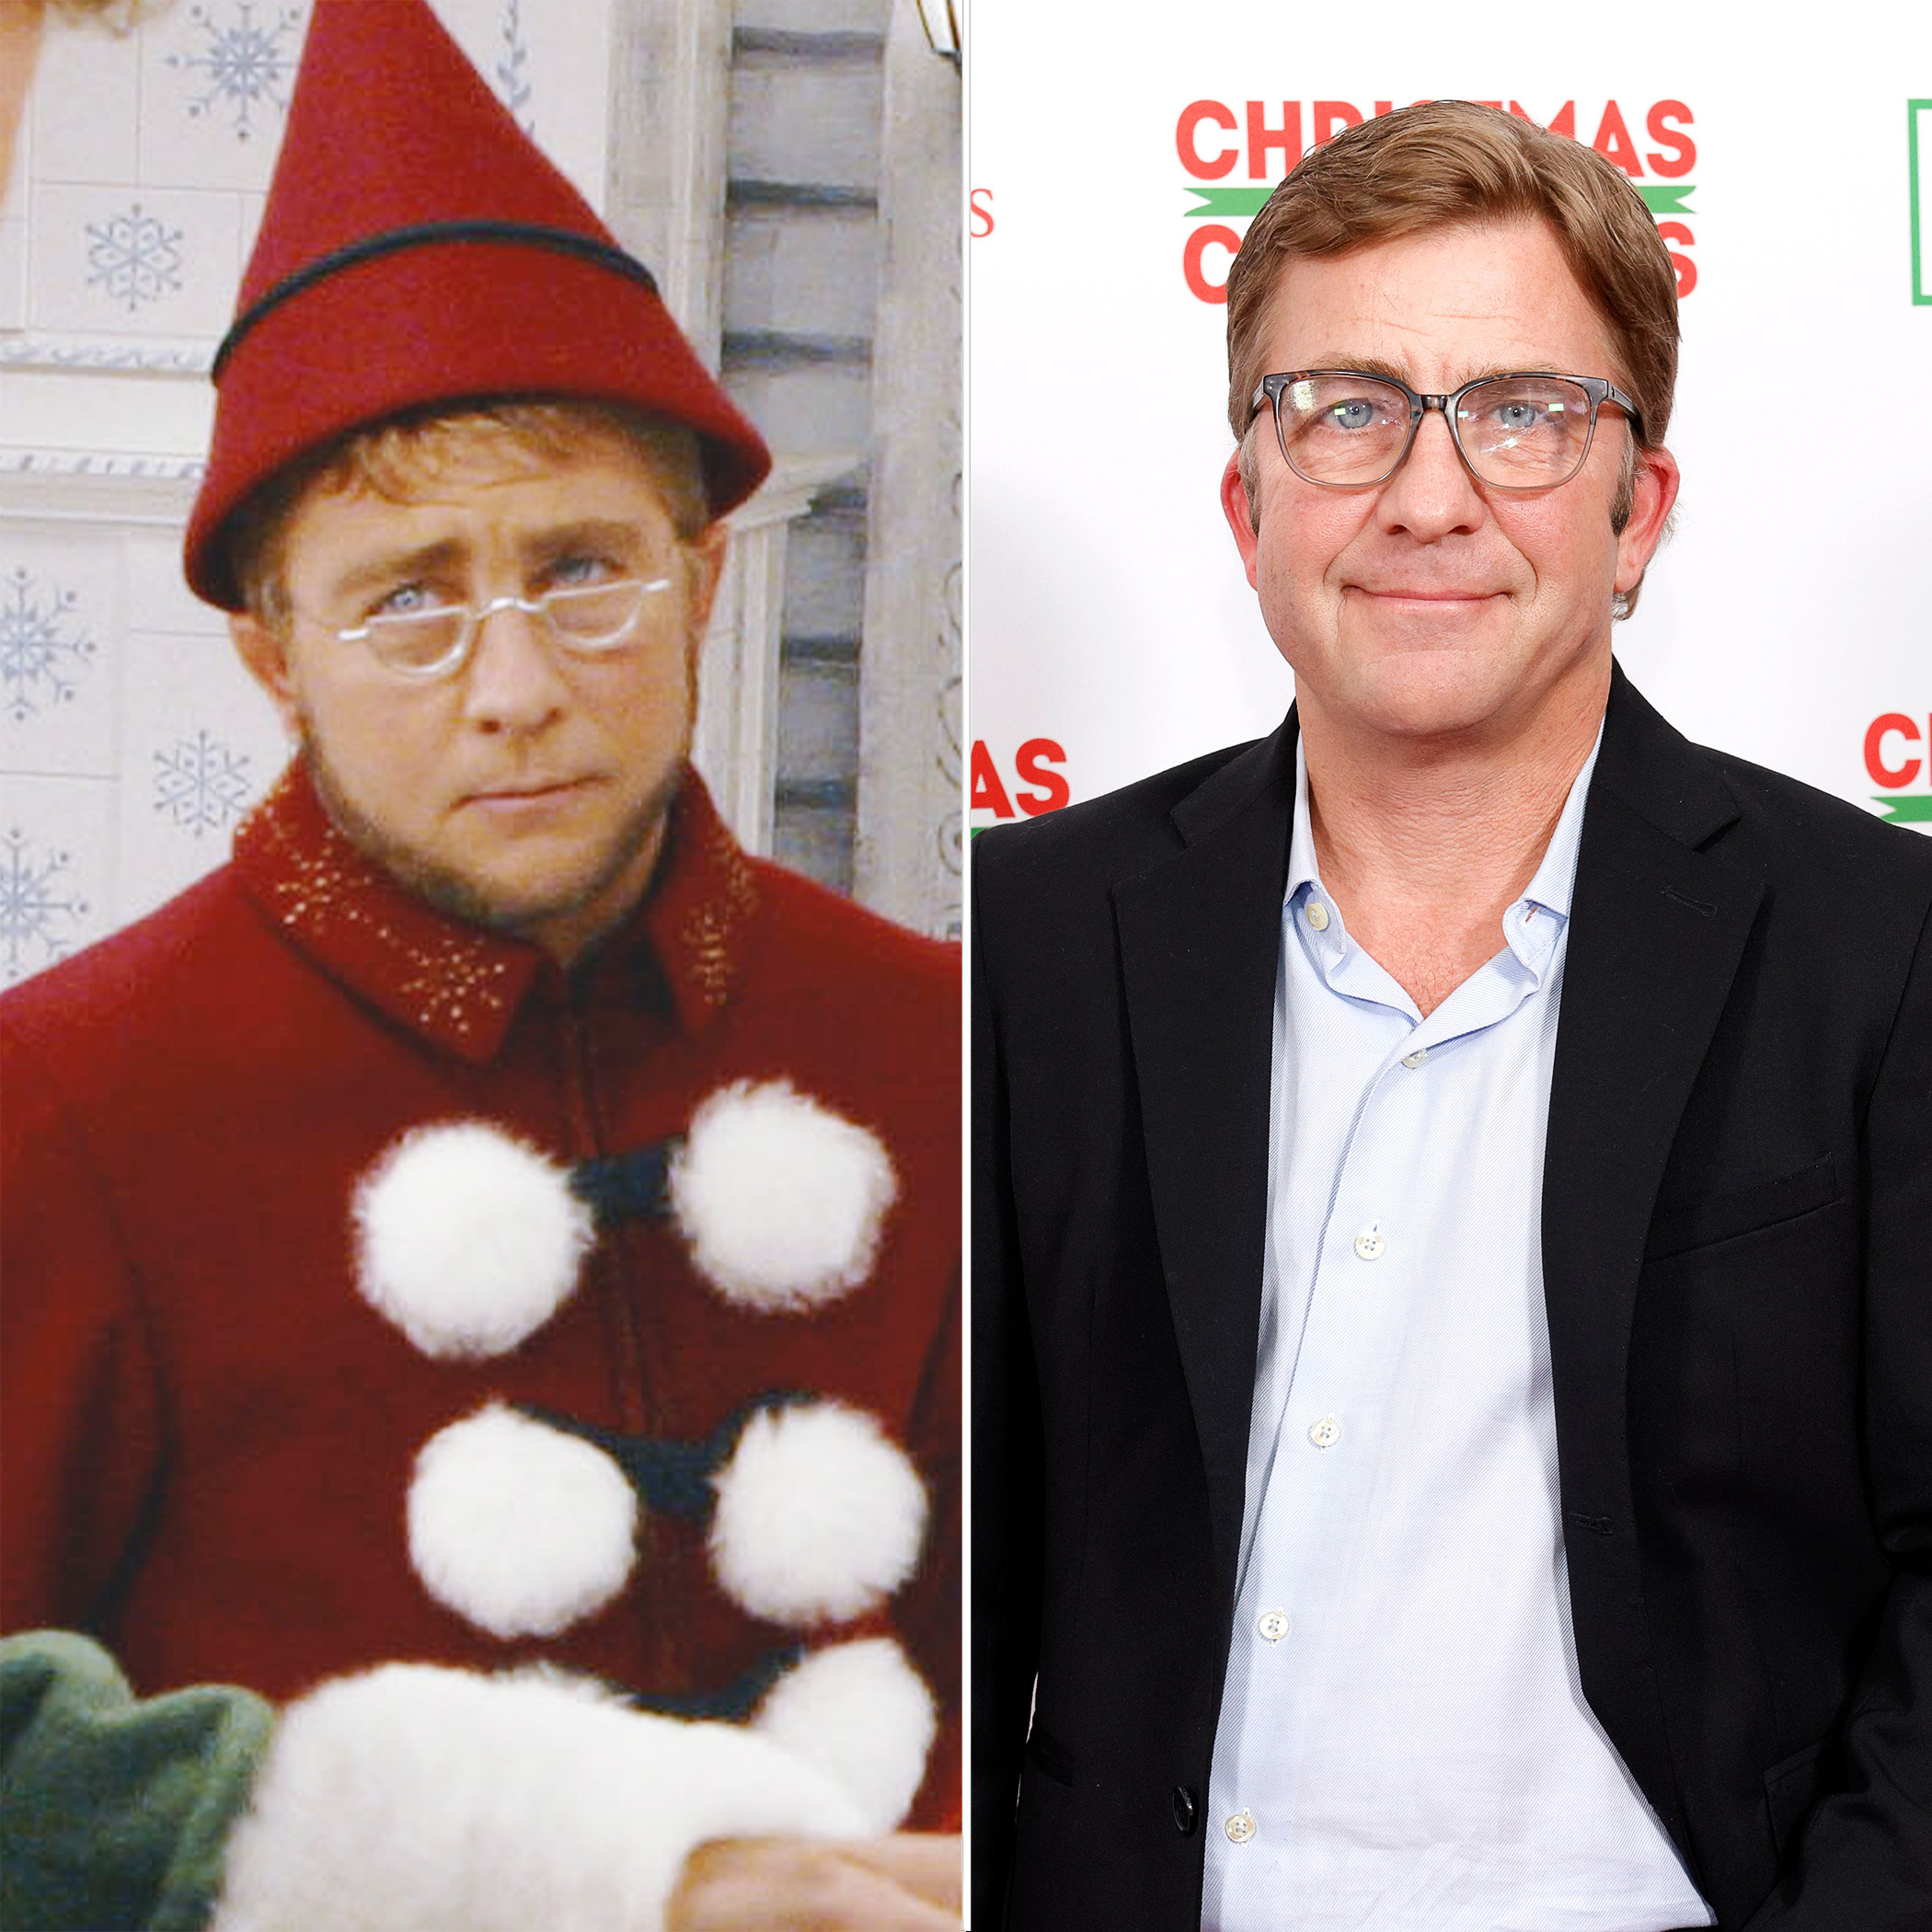 Elf' cast: Where are they now?